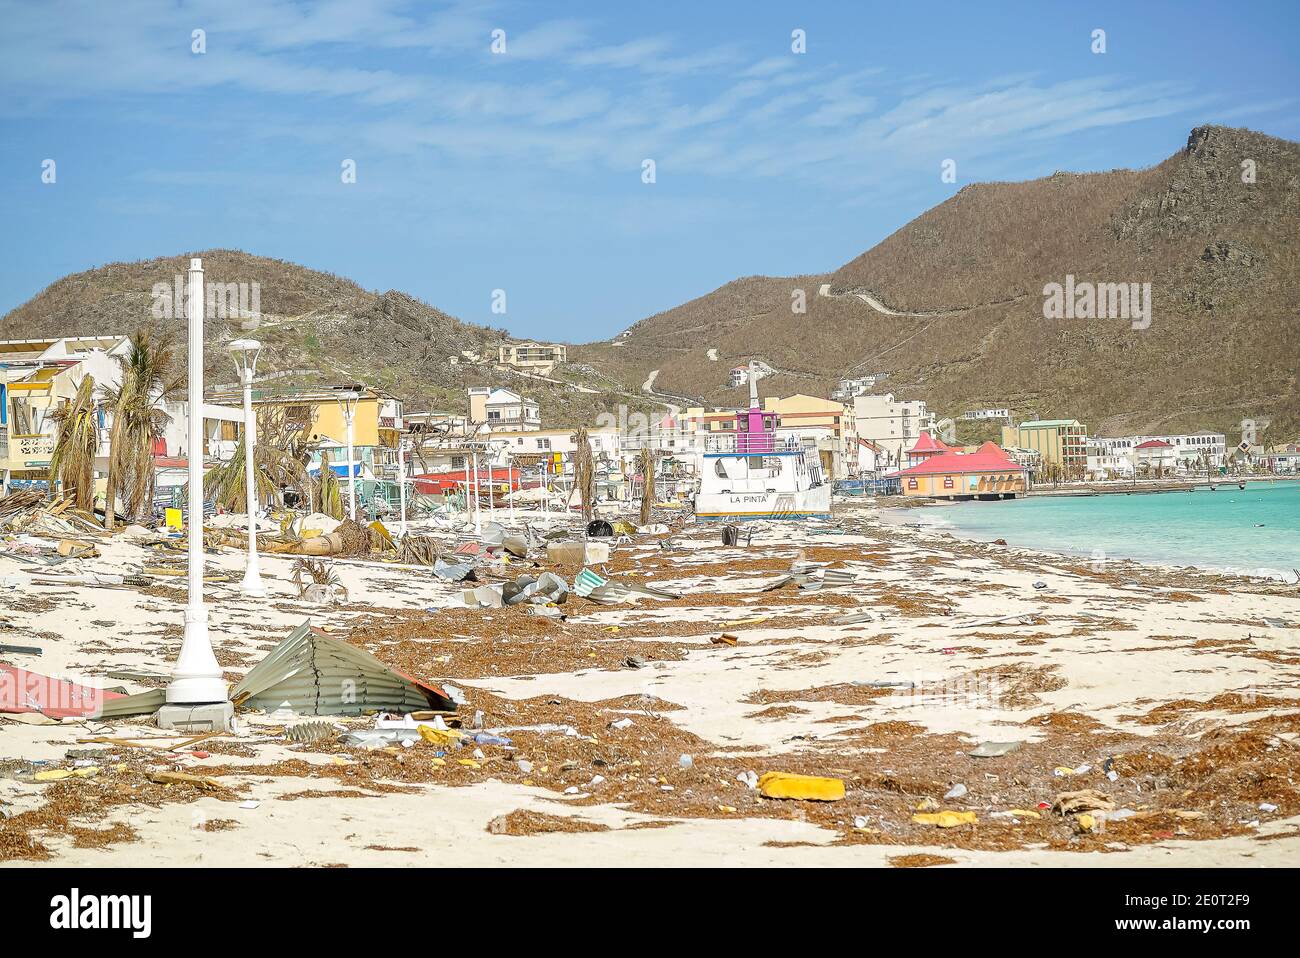 Damage cause by hurricane irma in the Caribbean island of st.maarten/st.martin in September 2017. Hurricane damage in the caribbean islands. Stock Photo